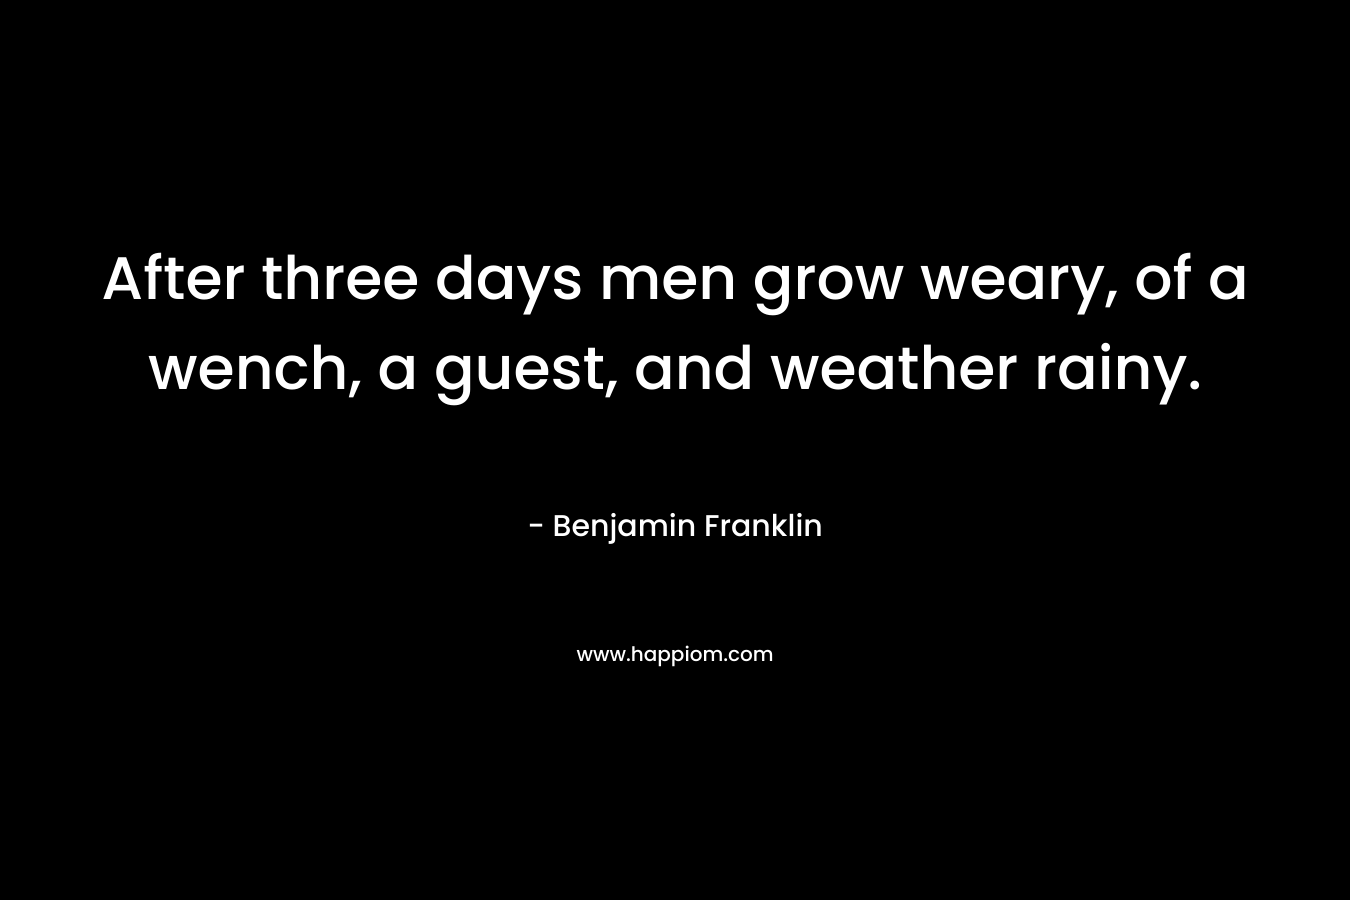 After three days men grow weary, of a wench, a guest, and weather rainy. – Benjamin Franklin